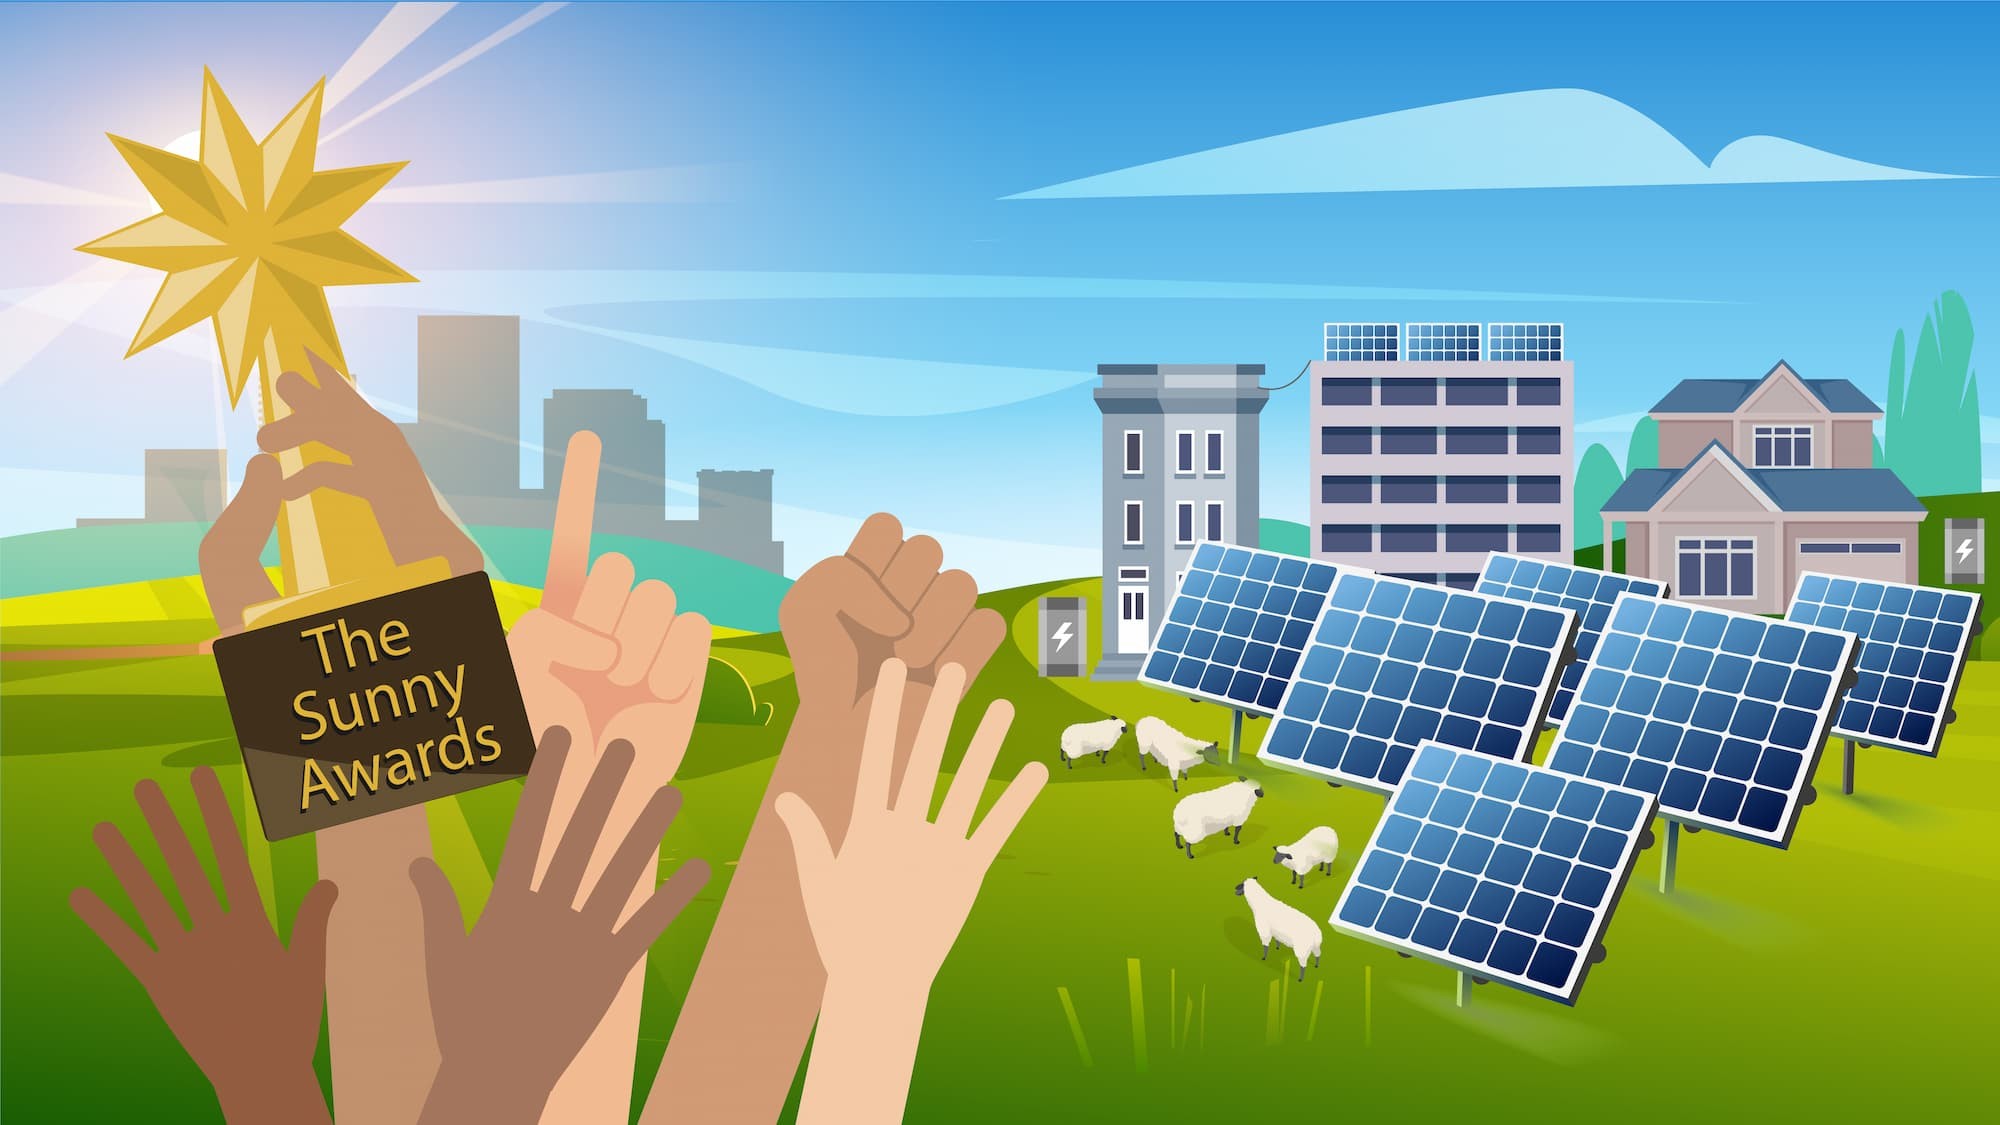 a graphic illustration of various skin tone hands holding a trophy labeled sunny awards with solar panels and a community in the background